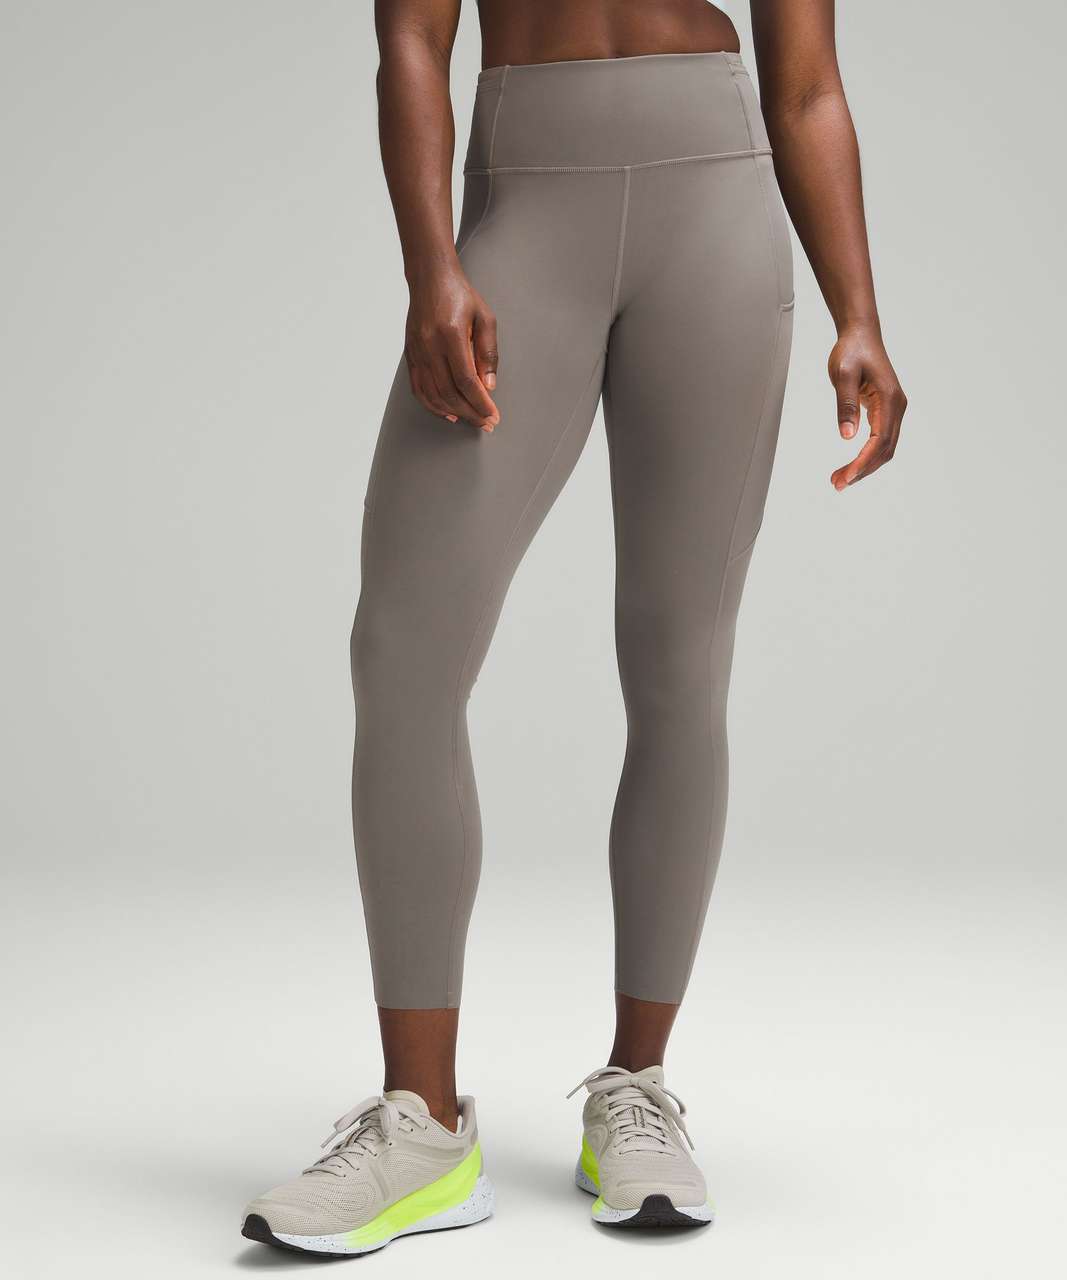 Lululemon Fast and Free High-Rise Tight 25" - Carbon Dust